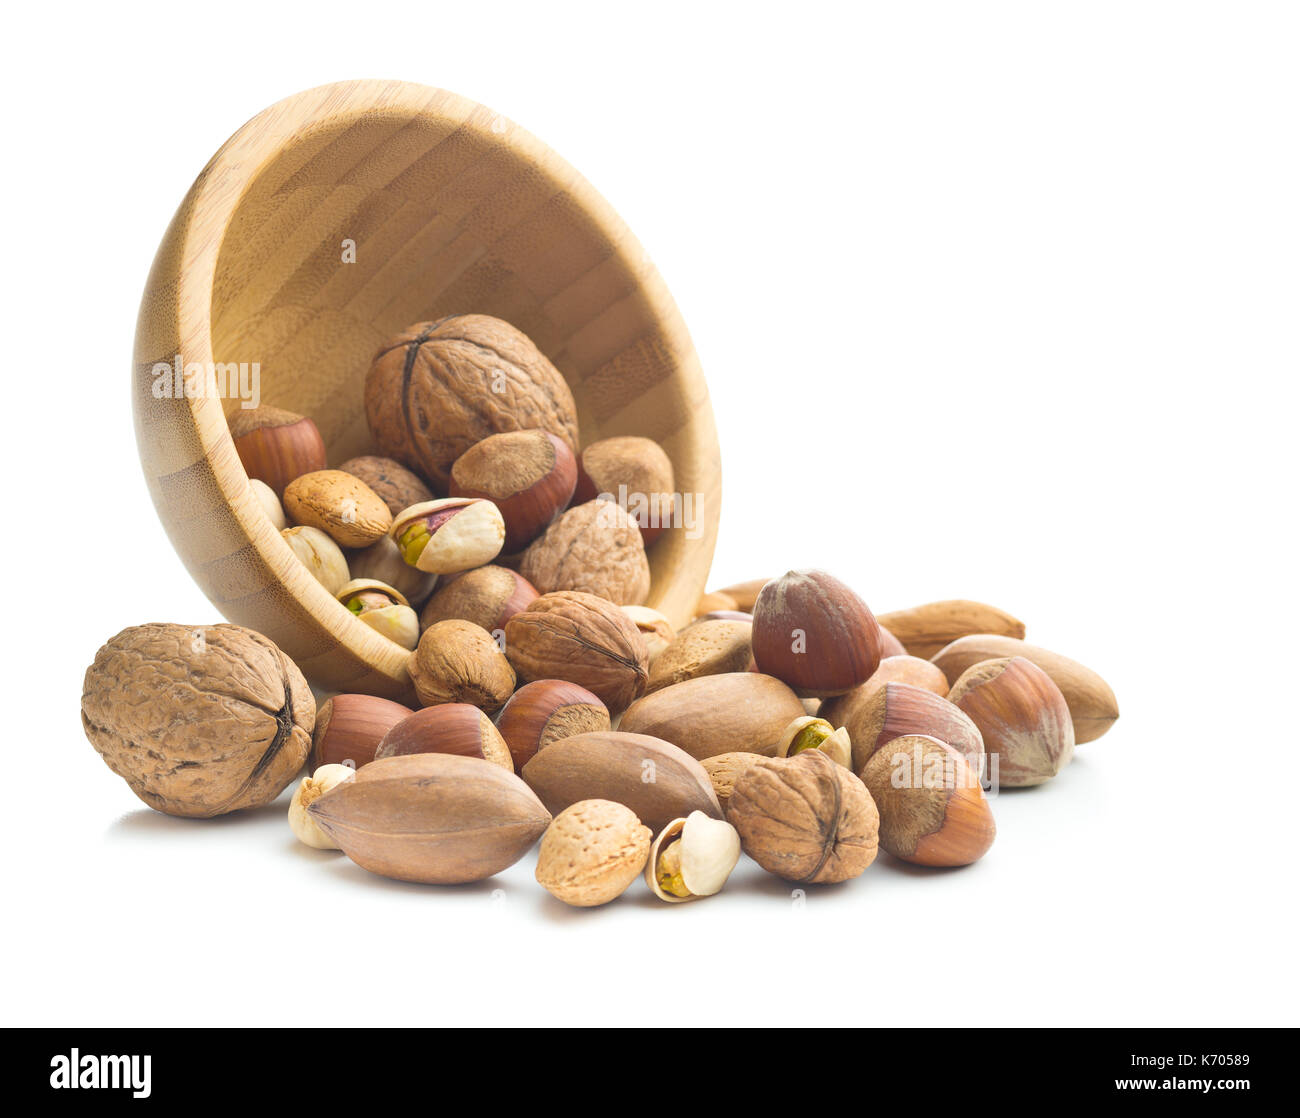 Different types of nuts in the nutshell. Hazelnuts, walnuts, almonds, pecan nuts and pistachio nuts isolated on white background. Stock Photo